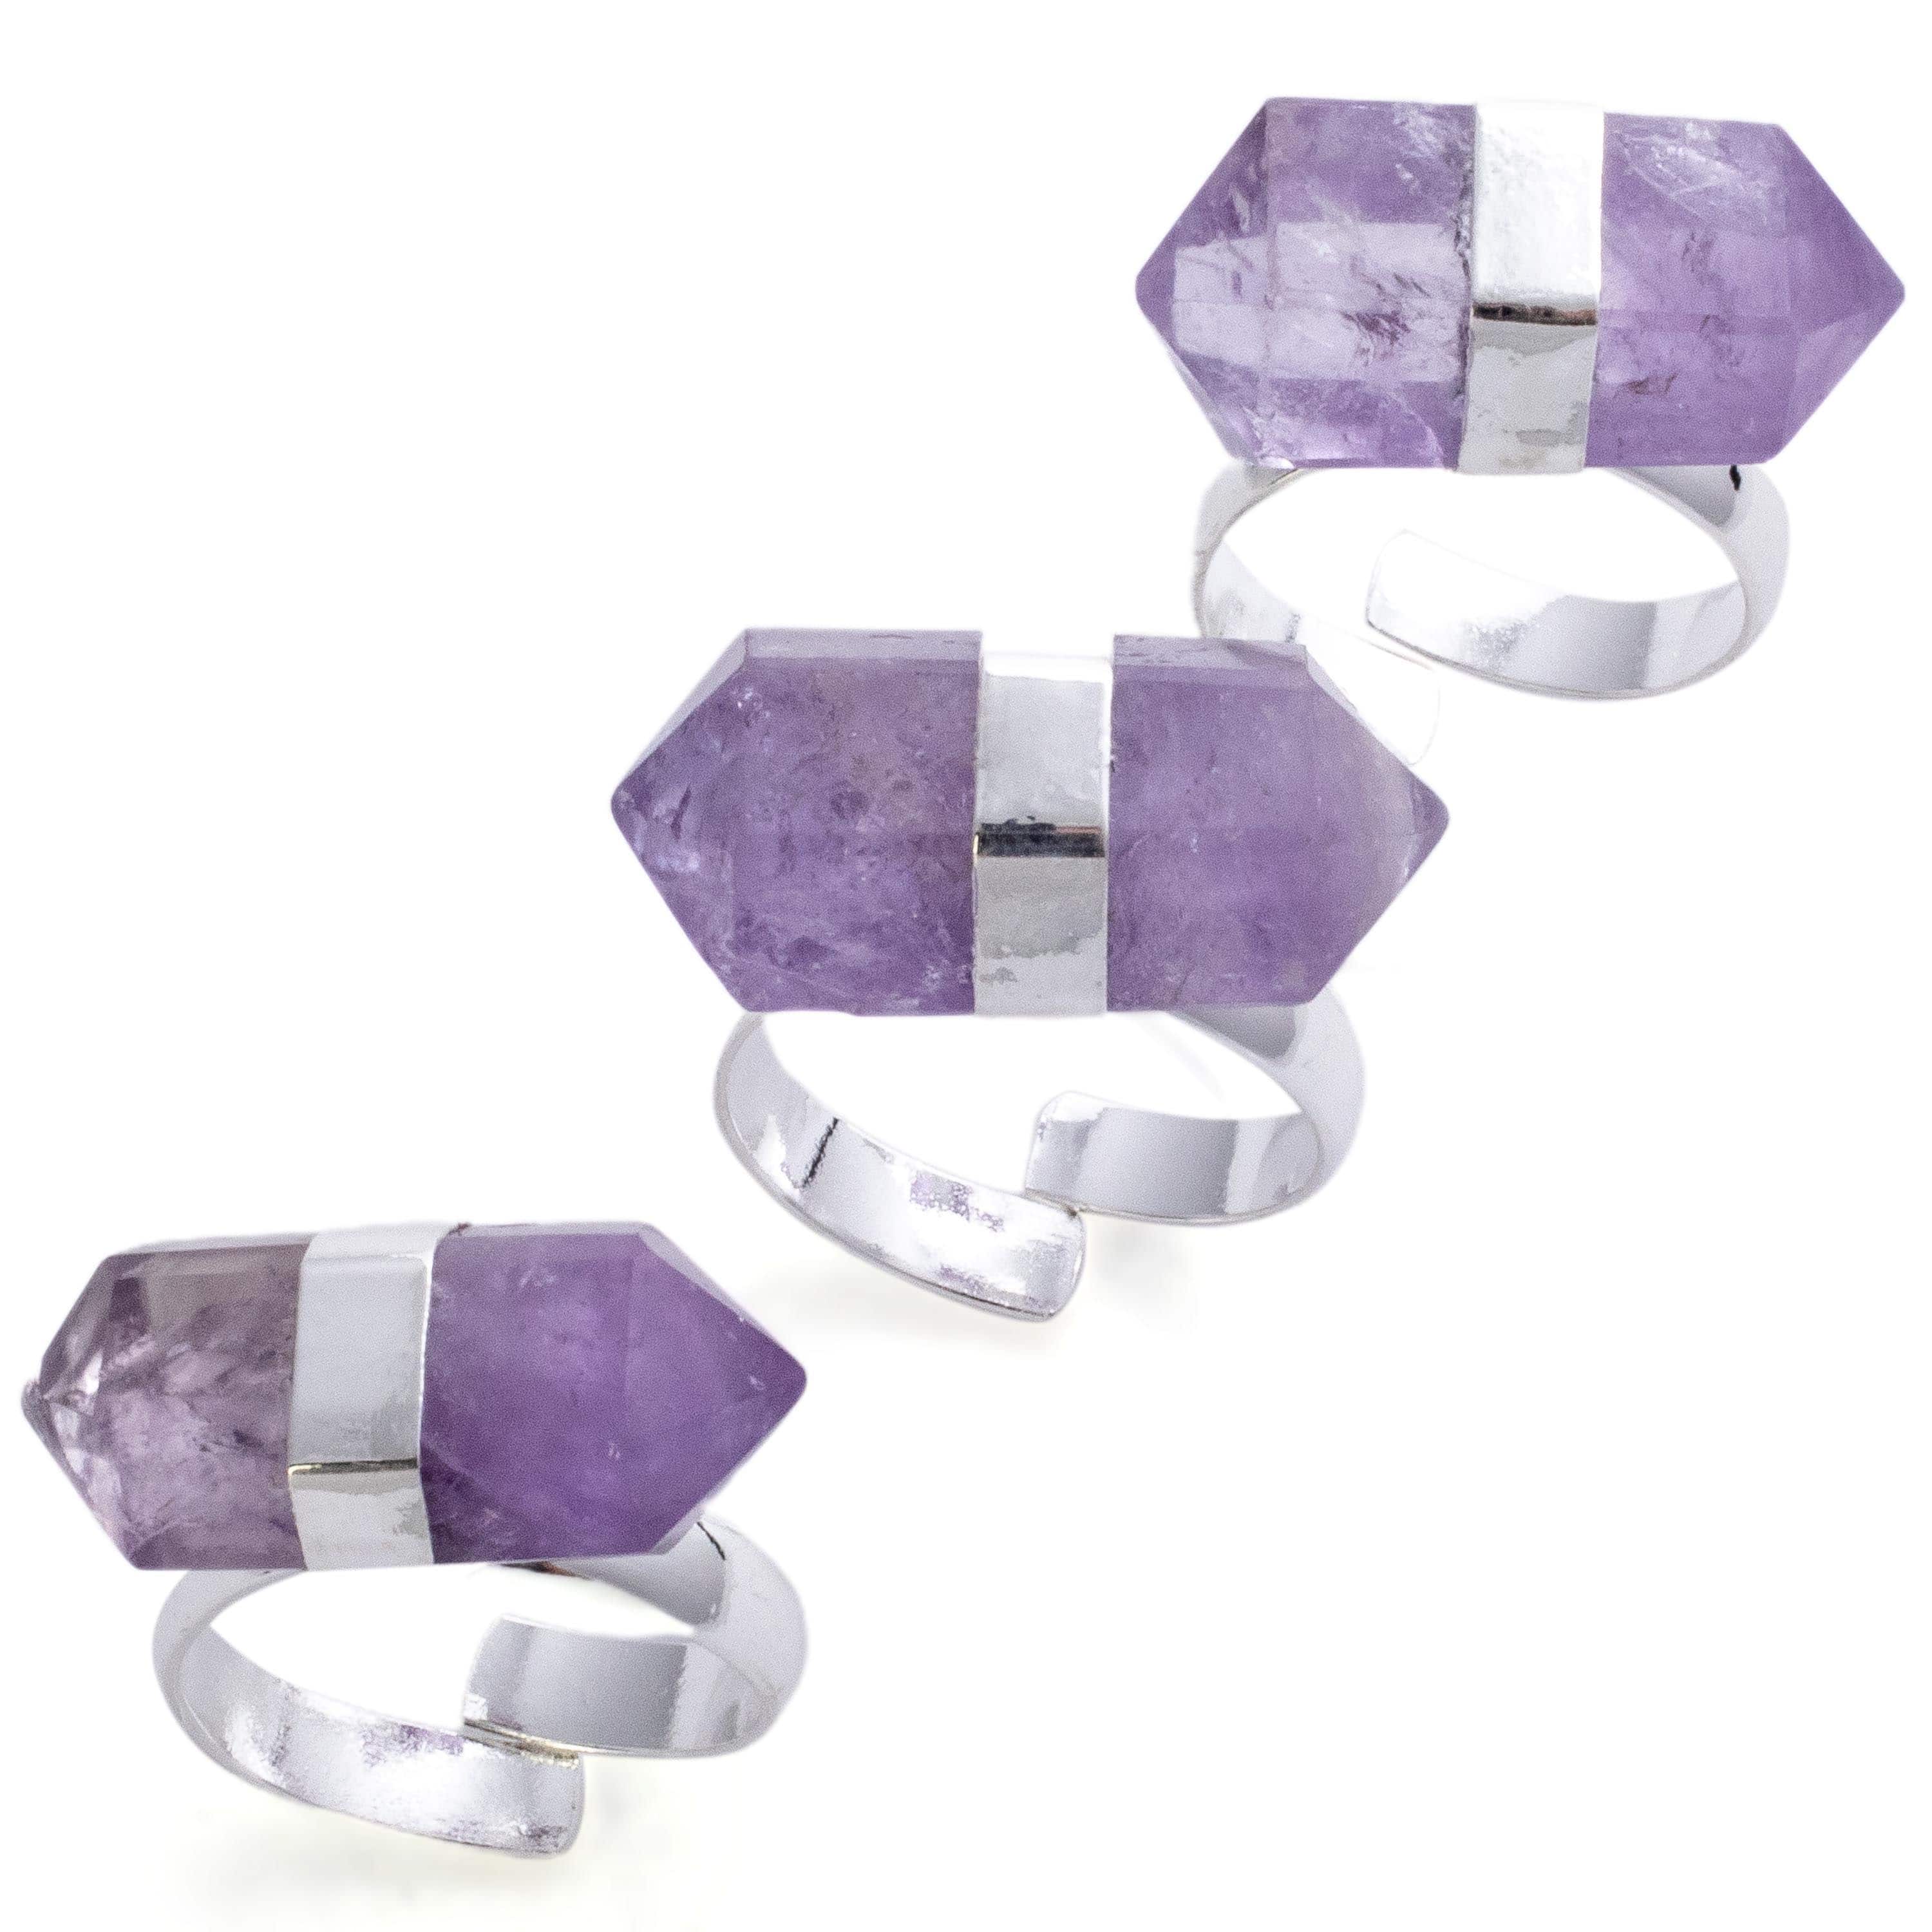 Kalifano Crystal Jewelry Silver Plated Amethyst Adjustable Ring CJR-MJS-AM